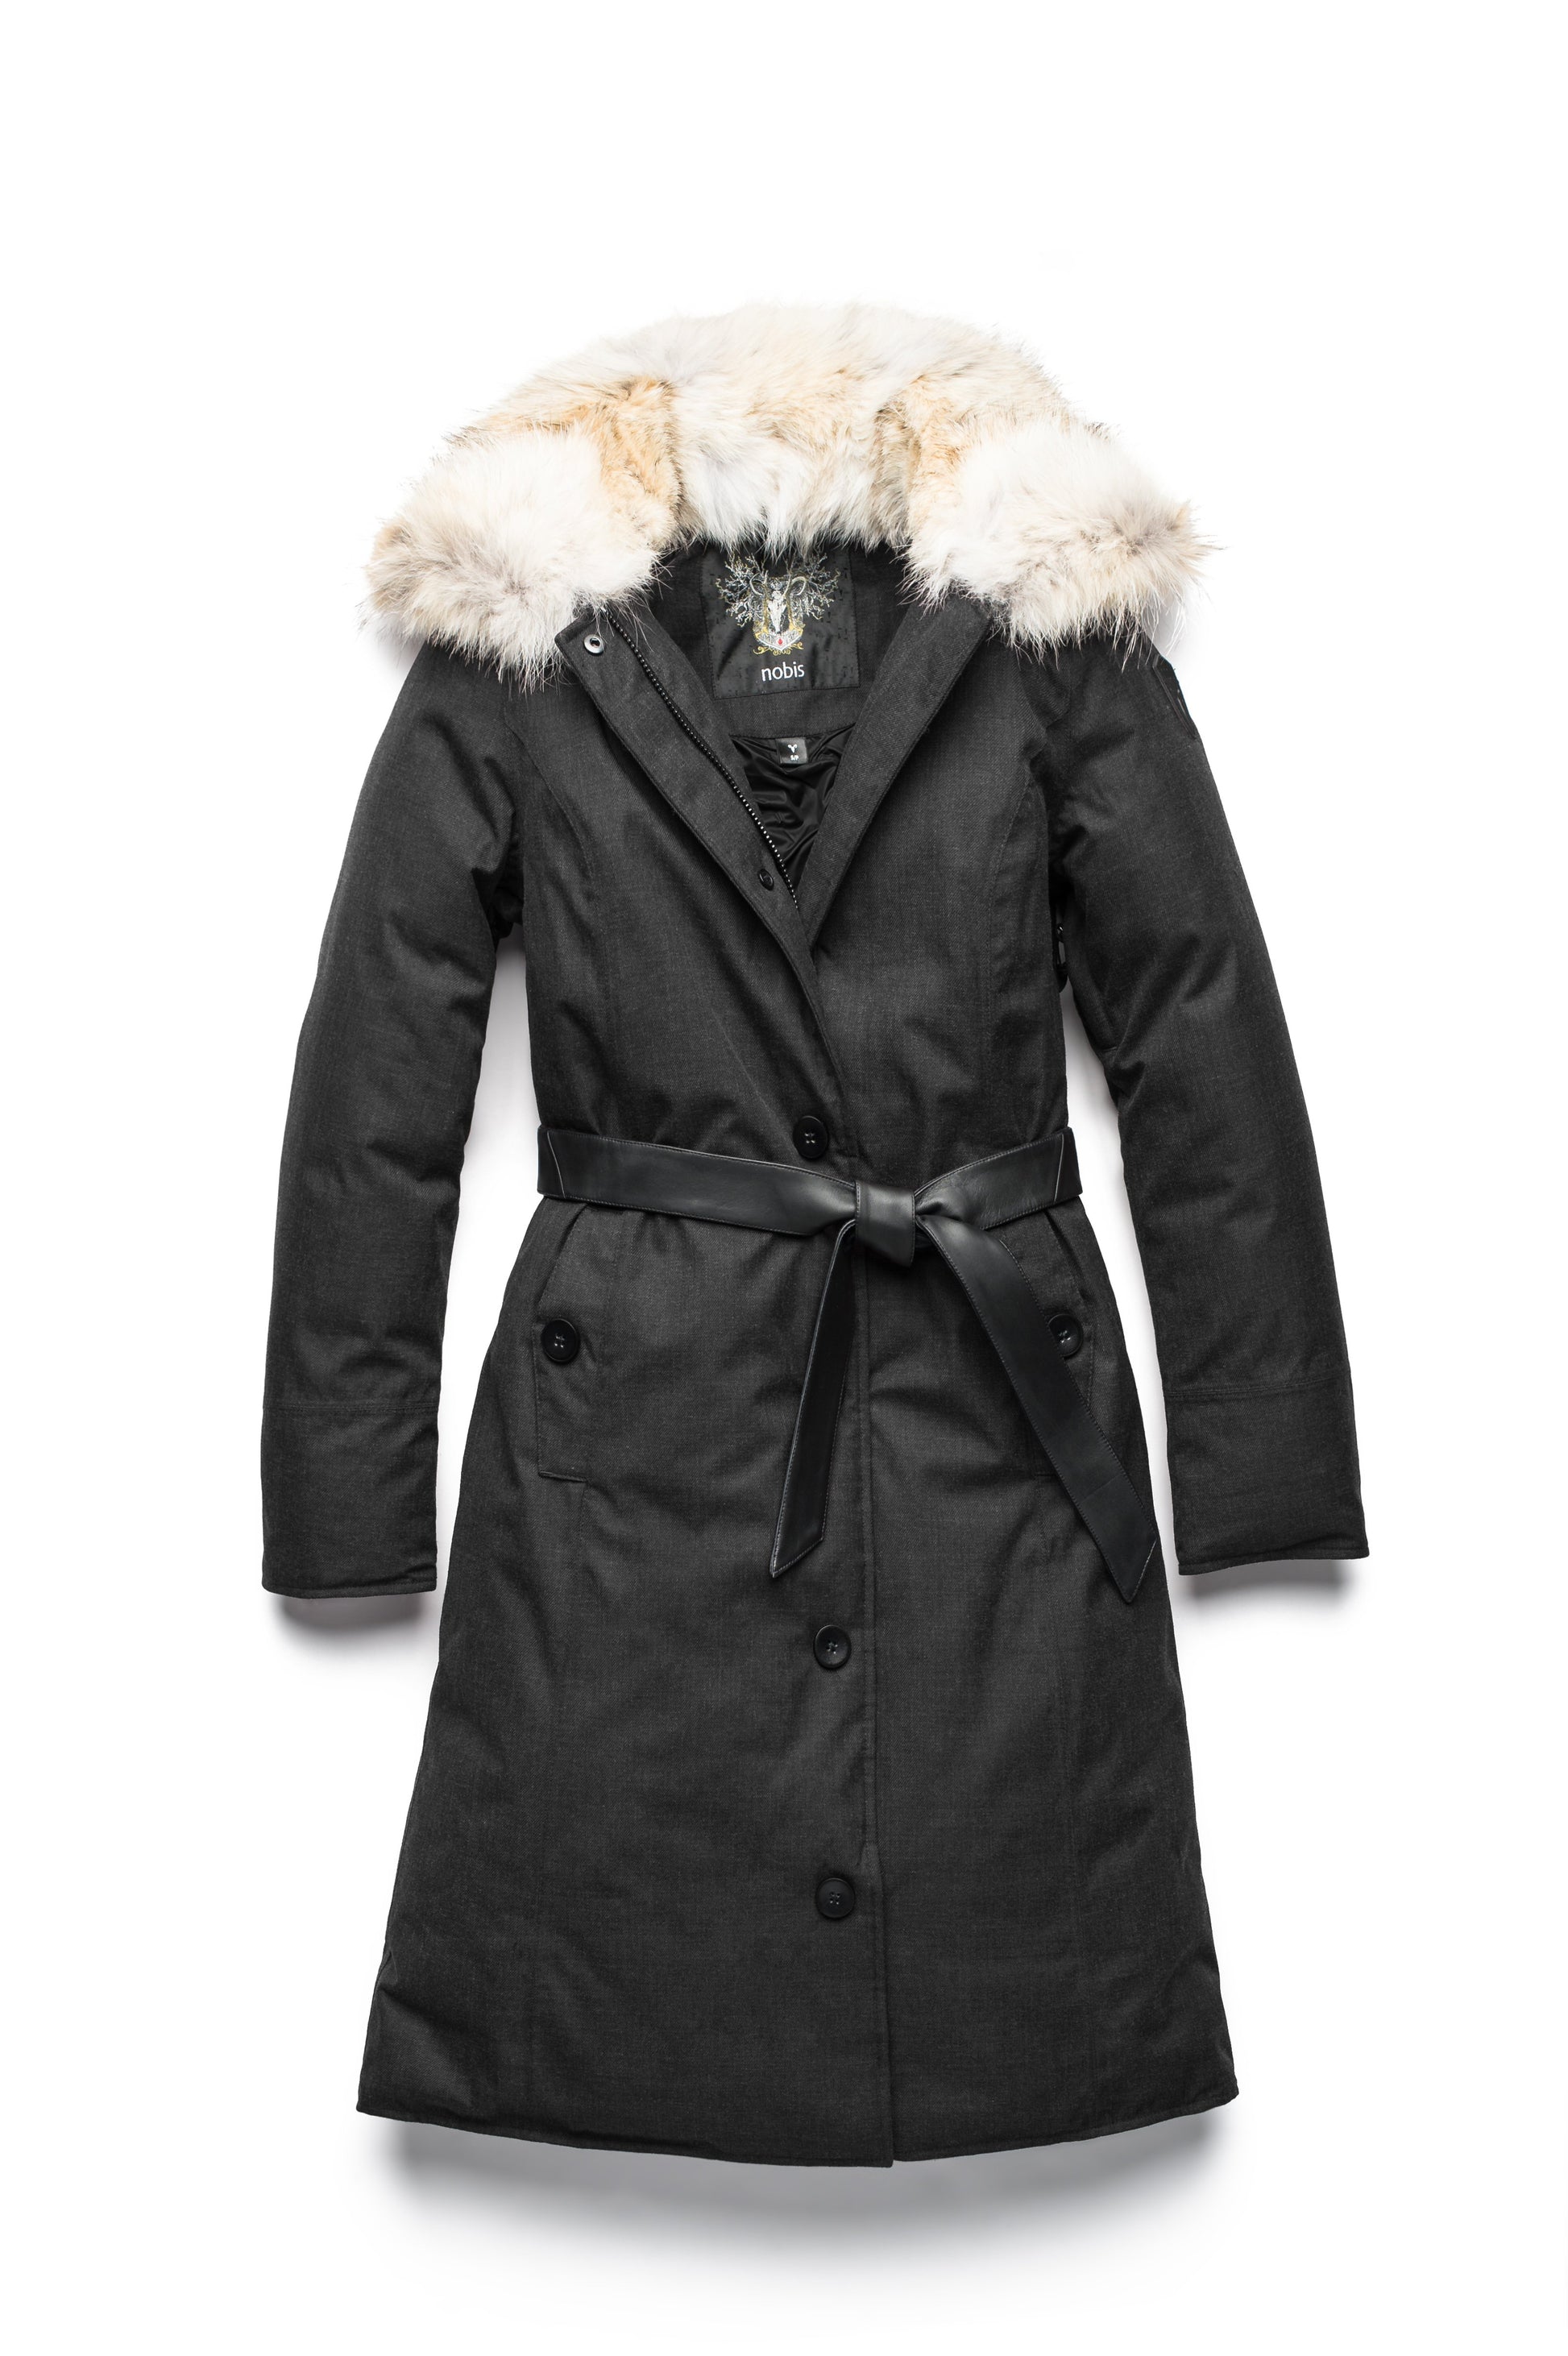 Women's lightweight down filled parka with a removable fur collar and a washable, Japanese DWR Leather belt in H. Black